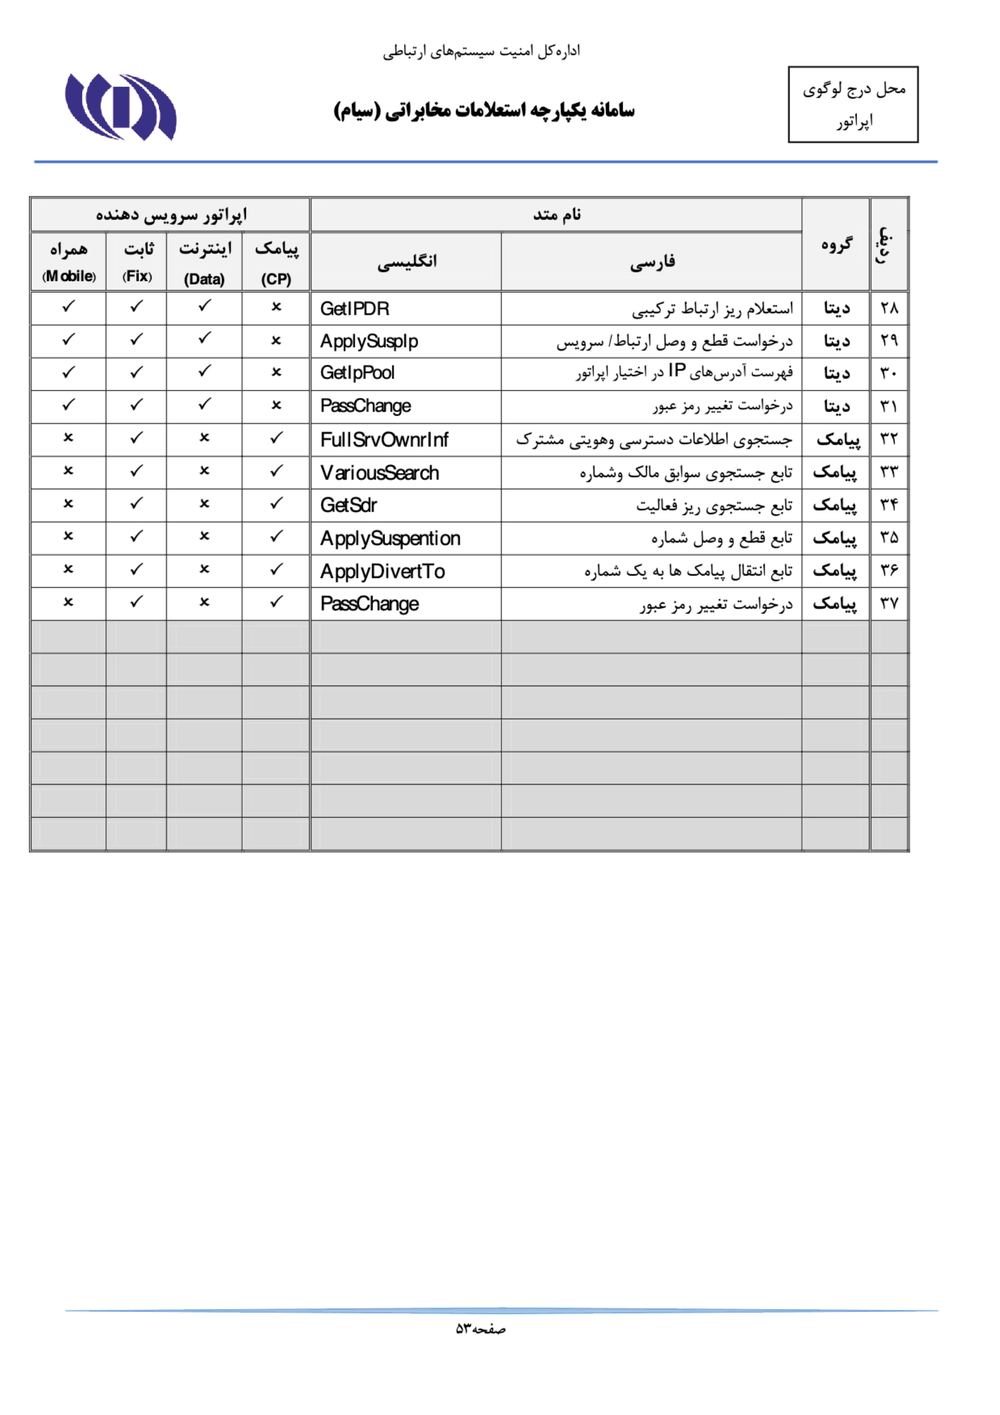 Page 53 from Iran’s SIAM Manual in Persian for Tracking and Controlling Mobile Phones